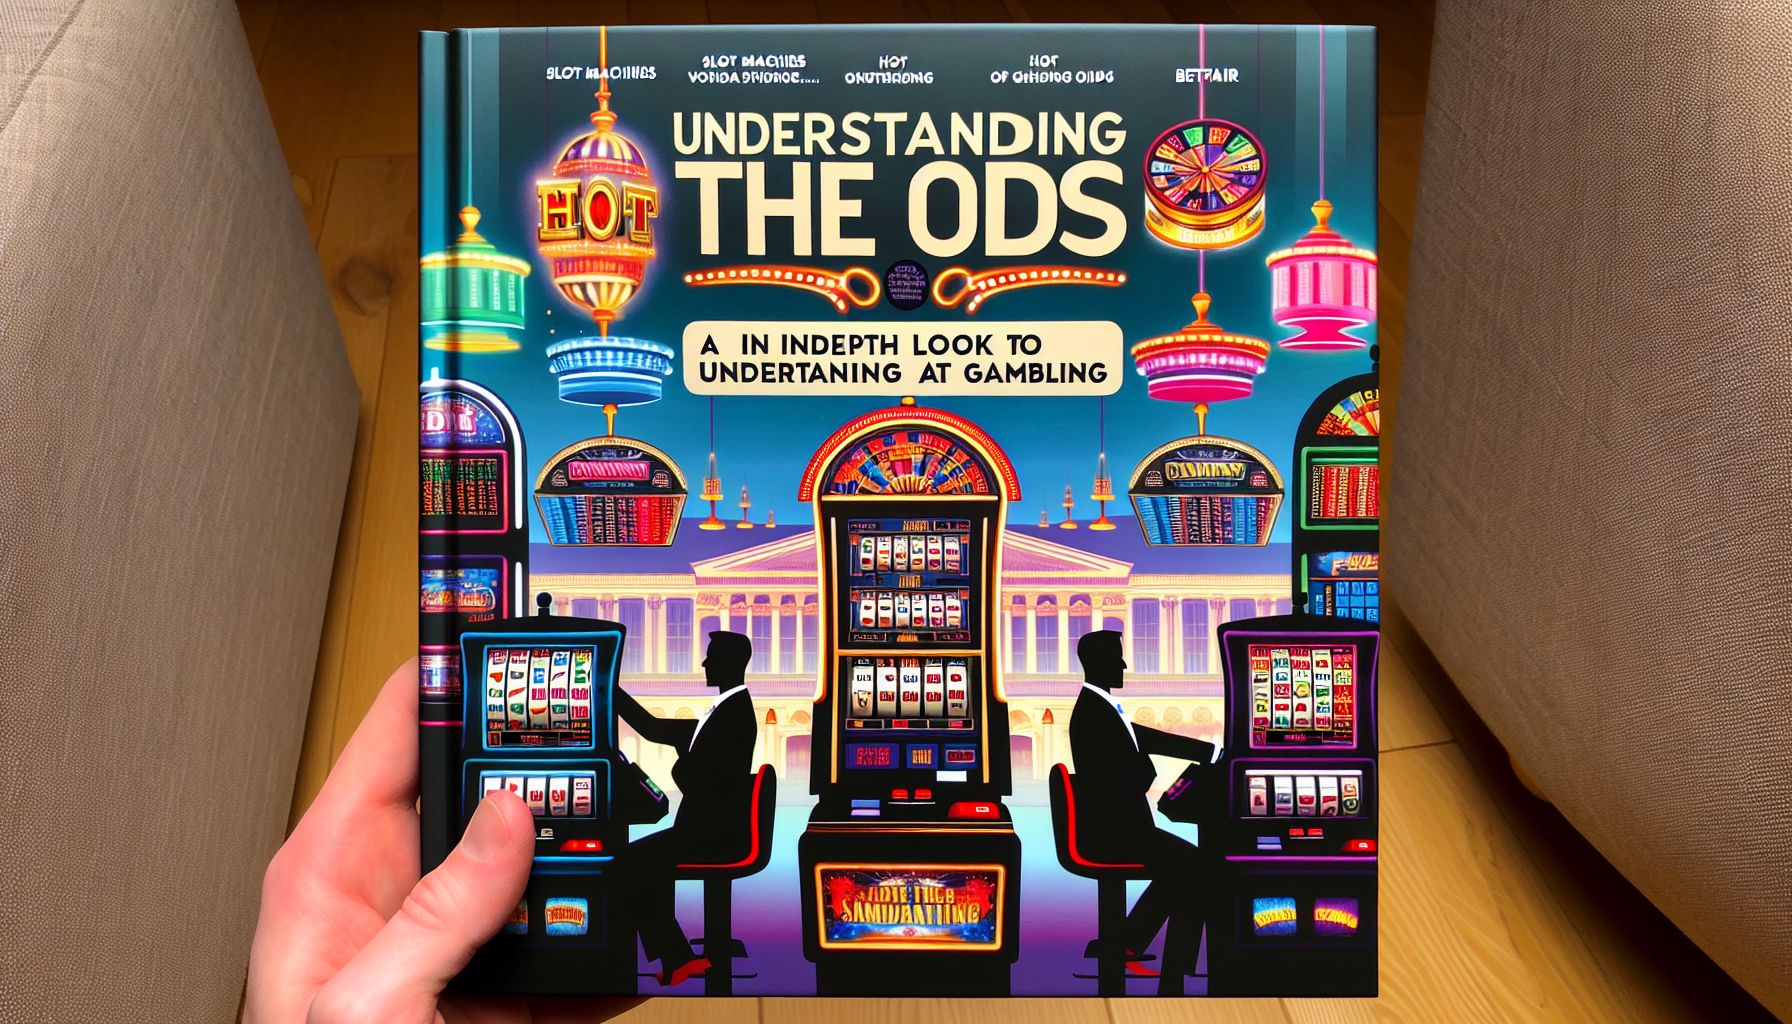 Understanding the Odds: An In-Depth Look at Gambling for Slot Machines, Hot Slot, and Betfair